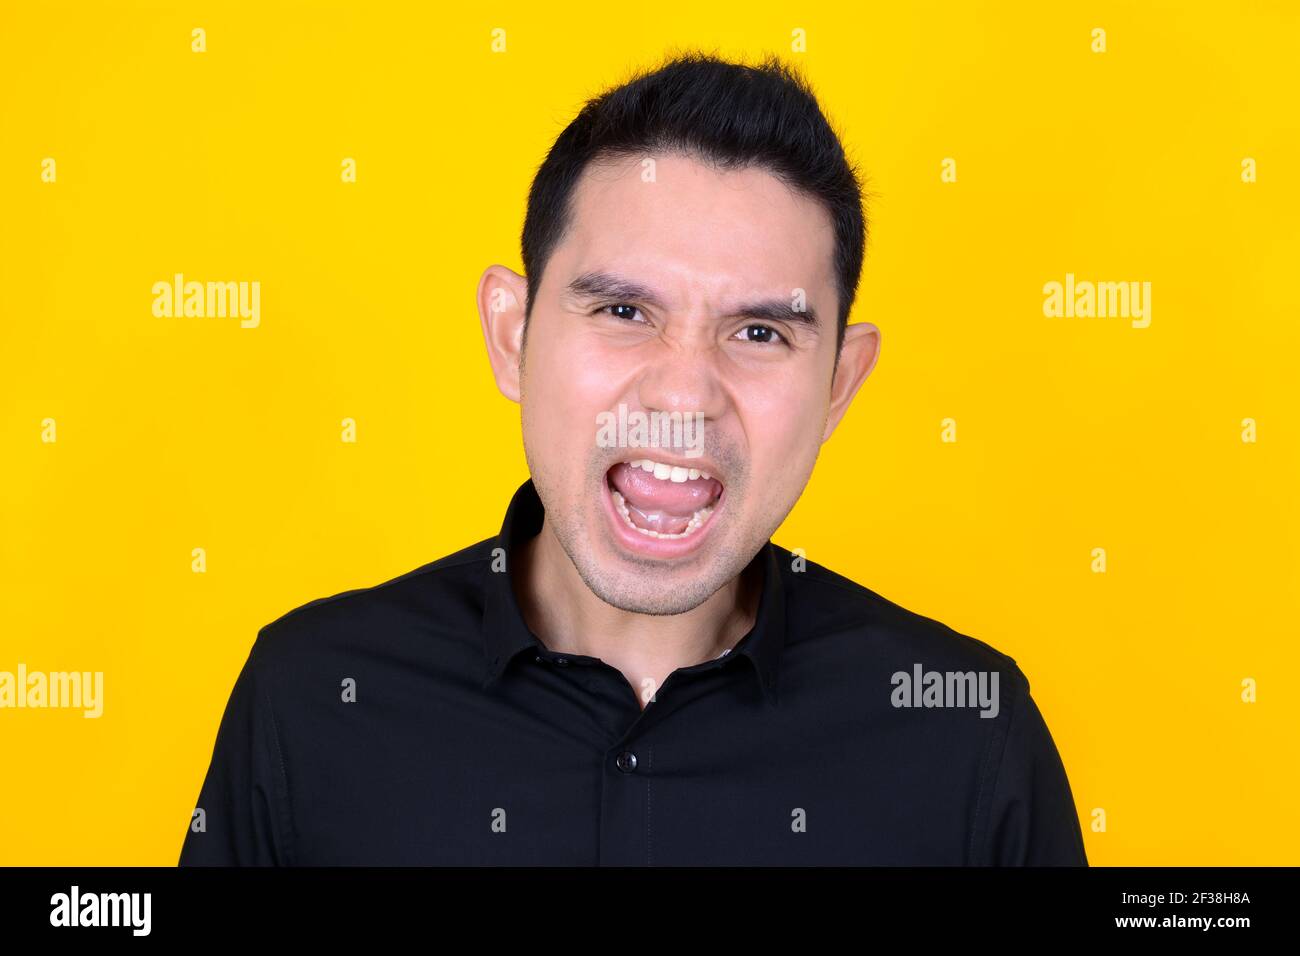 Angry man on yellow background Stock Photo